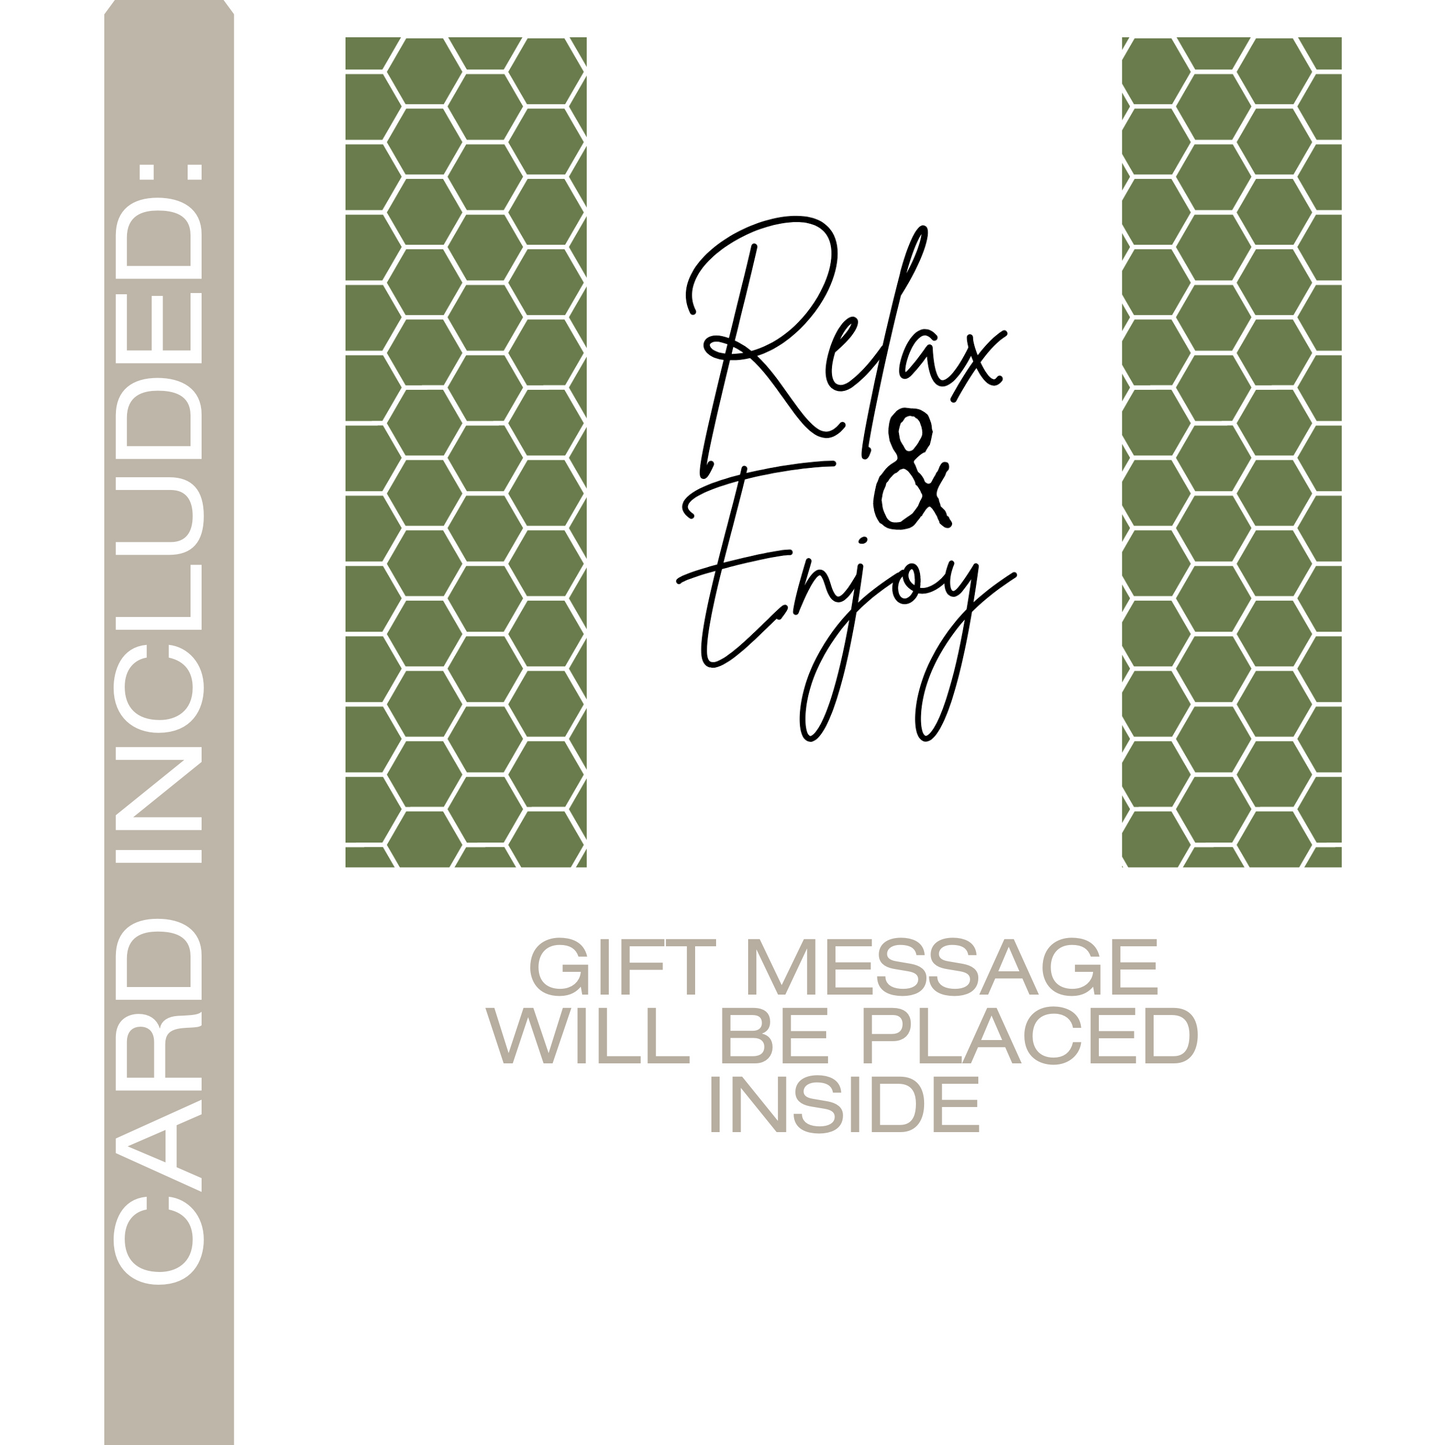 Relax and Enjoy •  All Natural Deluxe Care Package (11PC)